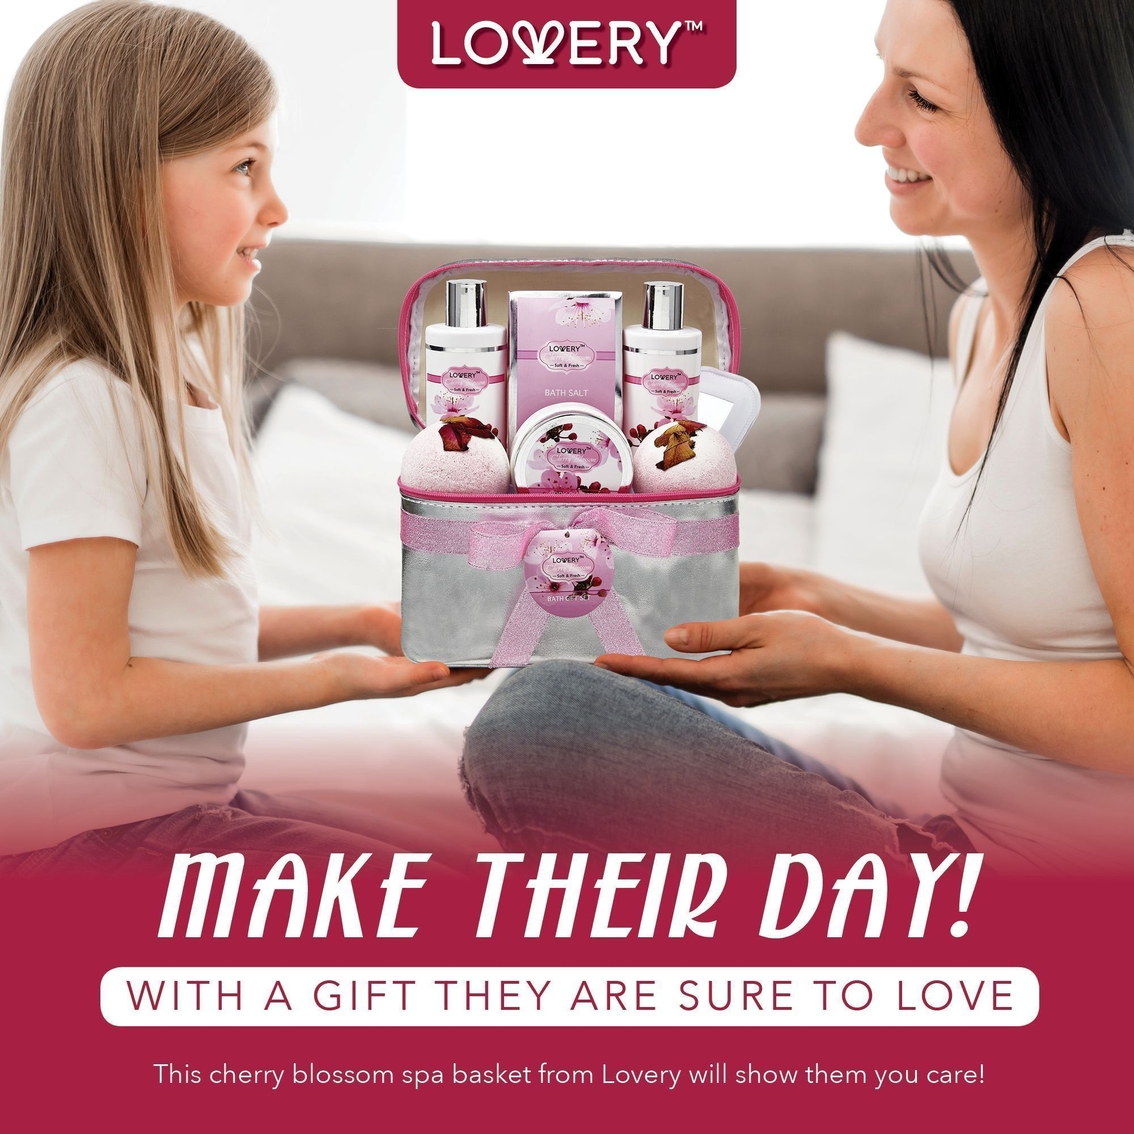 Lovery Bath And Body Spa Gift Basket Set - Image 5 of 5